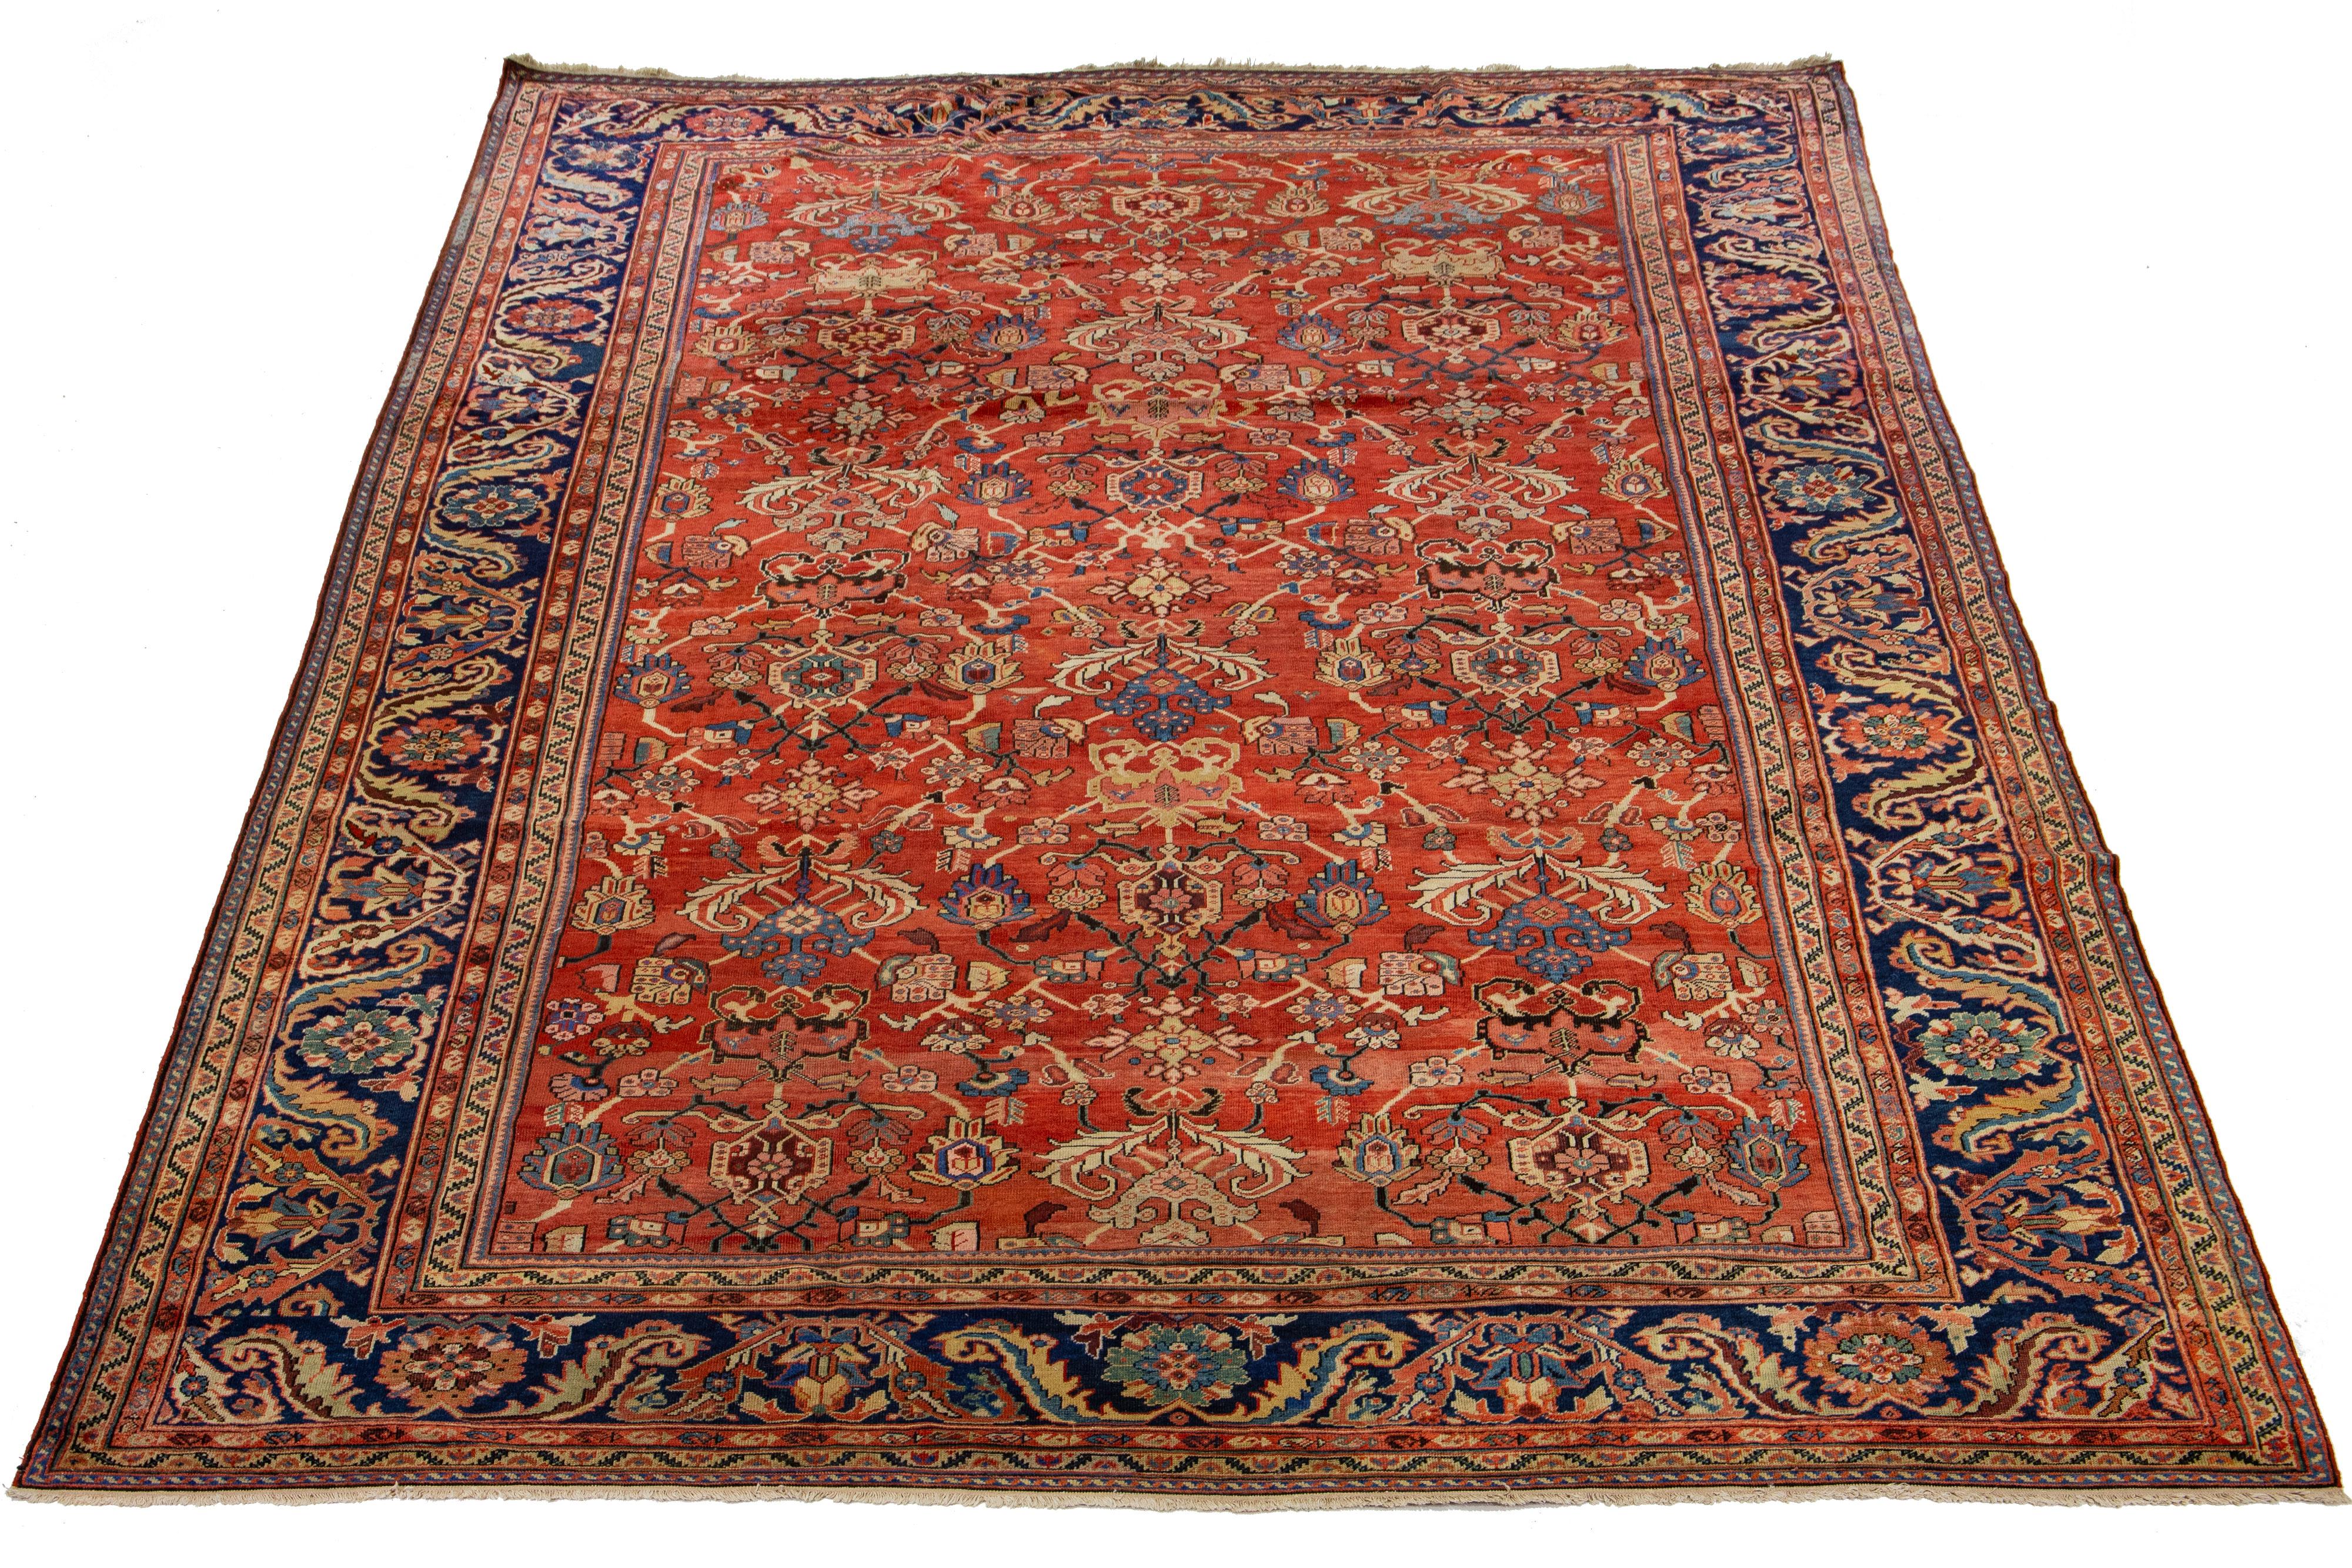 This 1890s antique Sultanabad wool rug is a beautiful hand-knotted piece featuring a red field. It showcases multicolor accents in an all-over floral design, characteristic of Persian rugs. The enduring quality of this classic rug design is